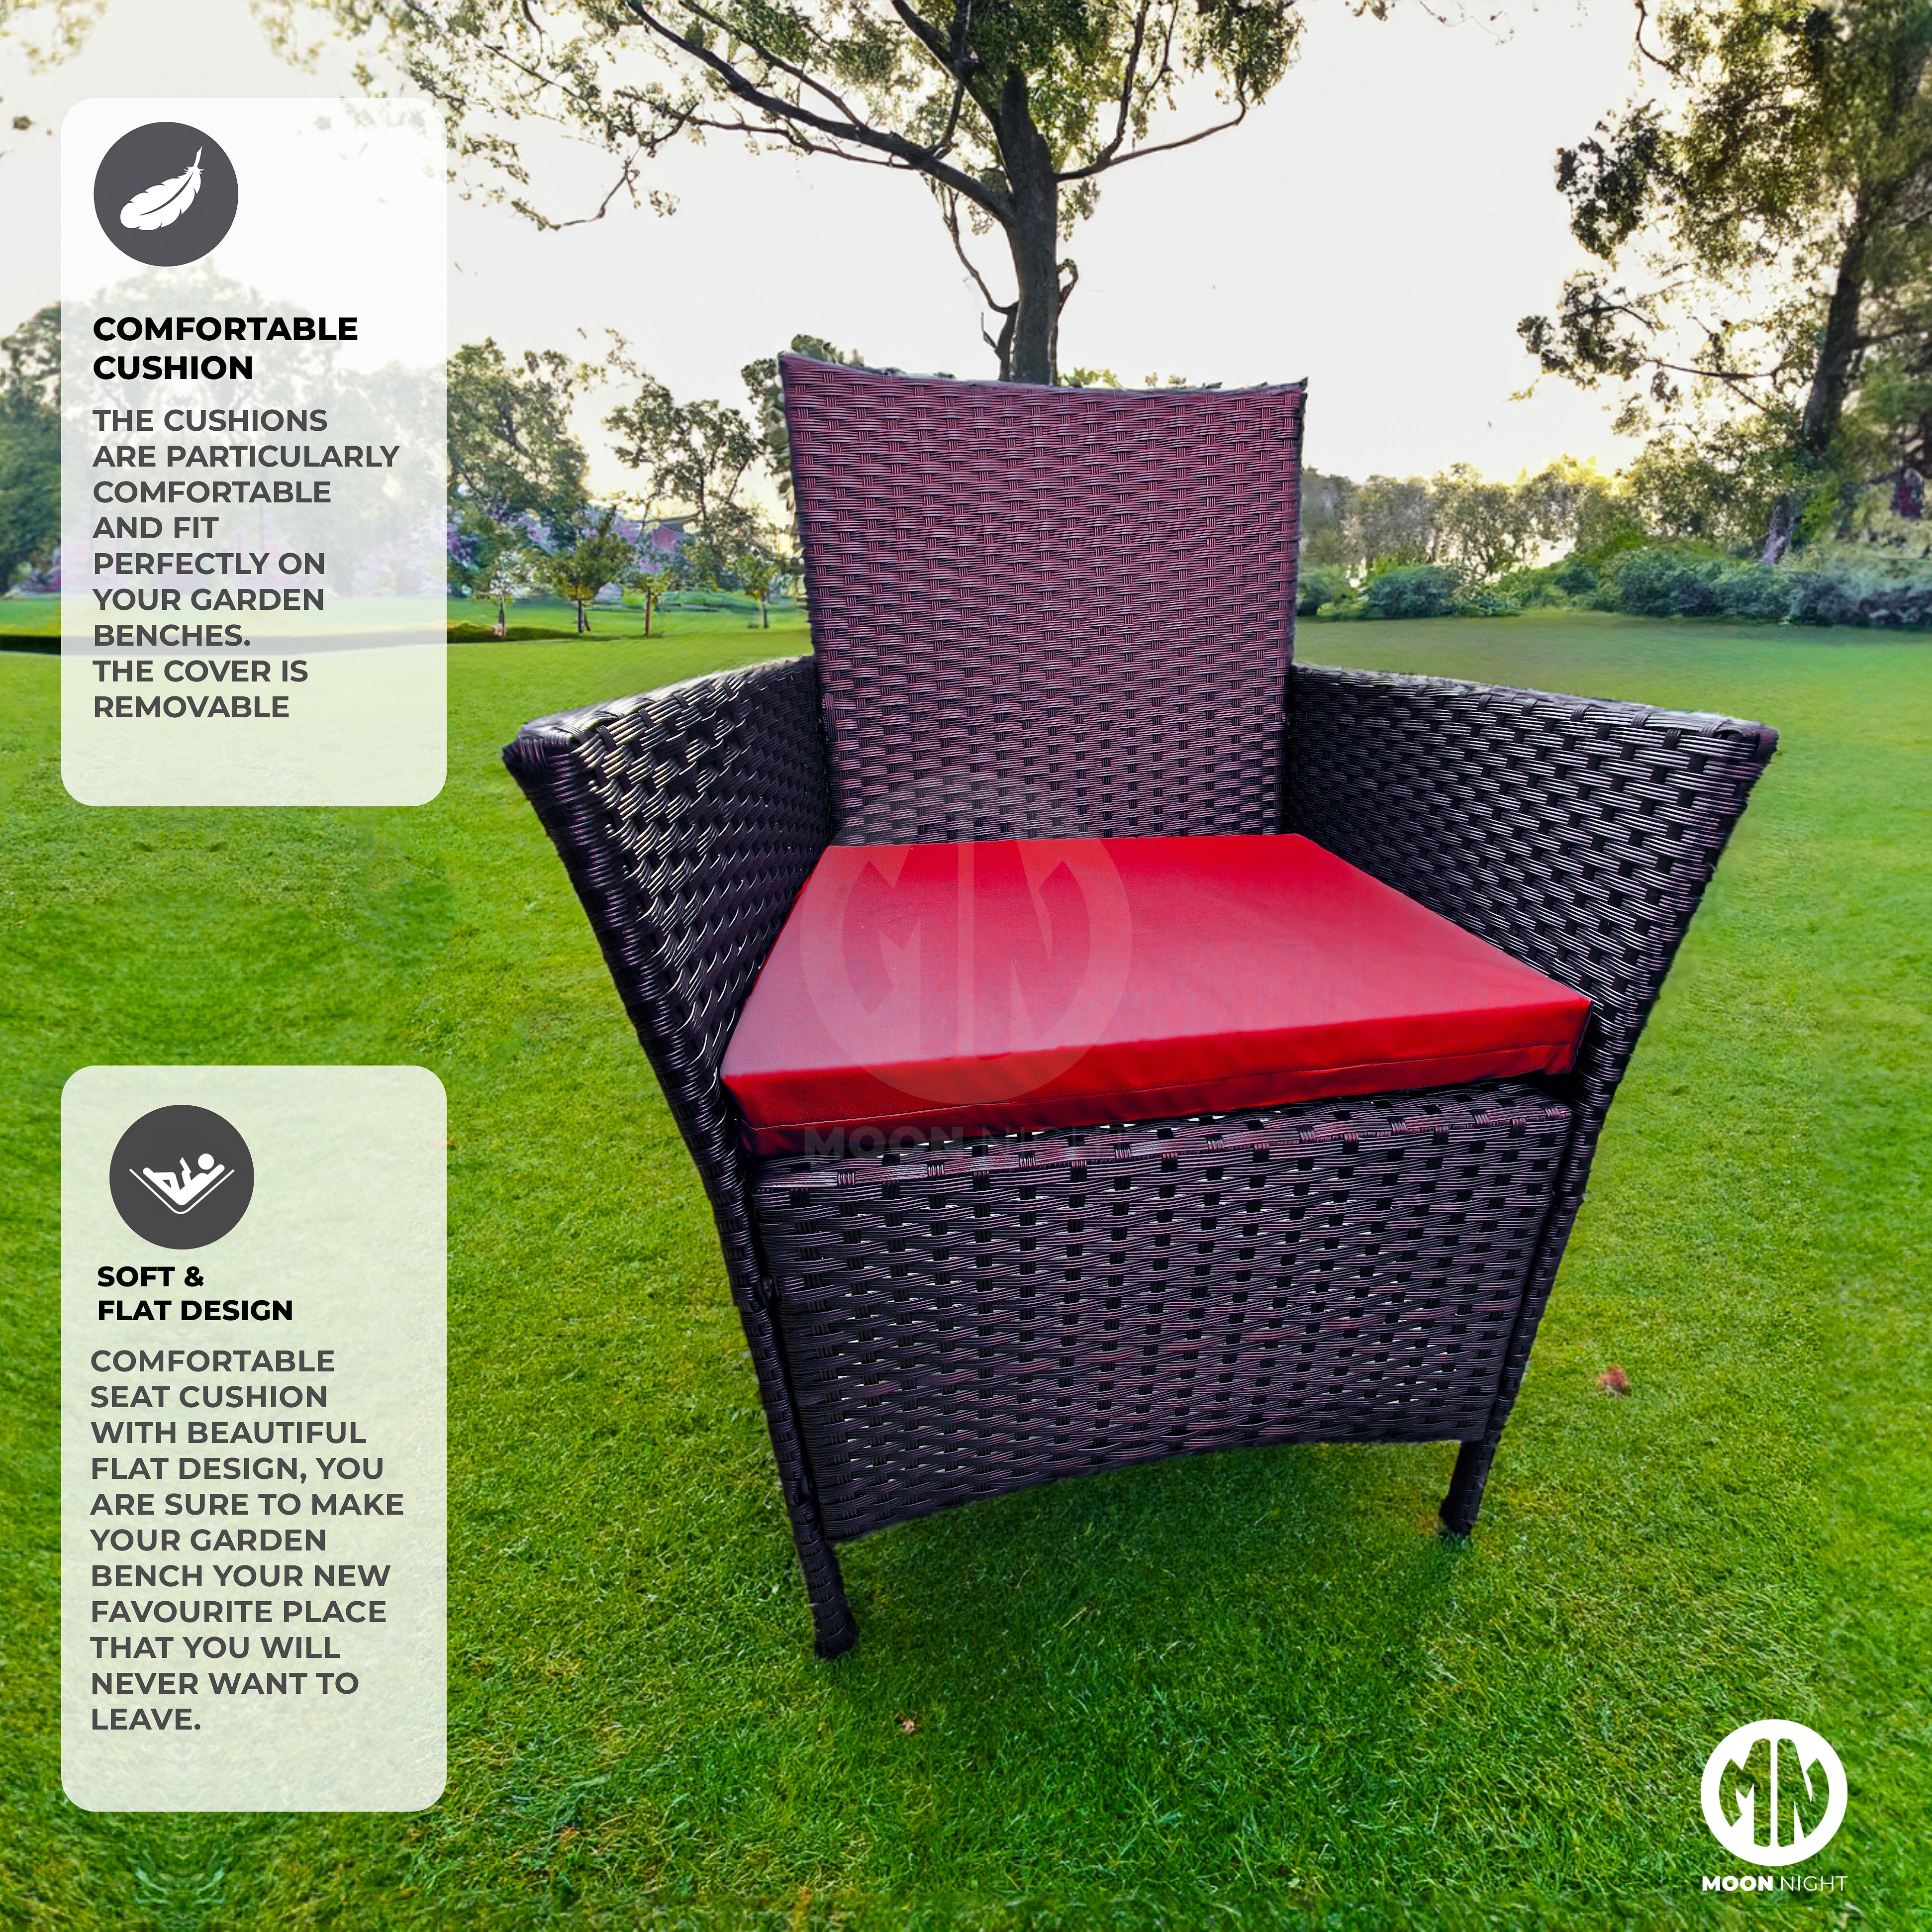 Moon Night® Replacement 3 pieces Rattan Chair Cushion Set Outdoor Garden Sofa Seat Pad [Made in UK]- Red